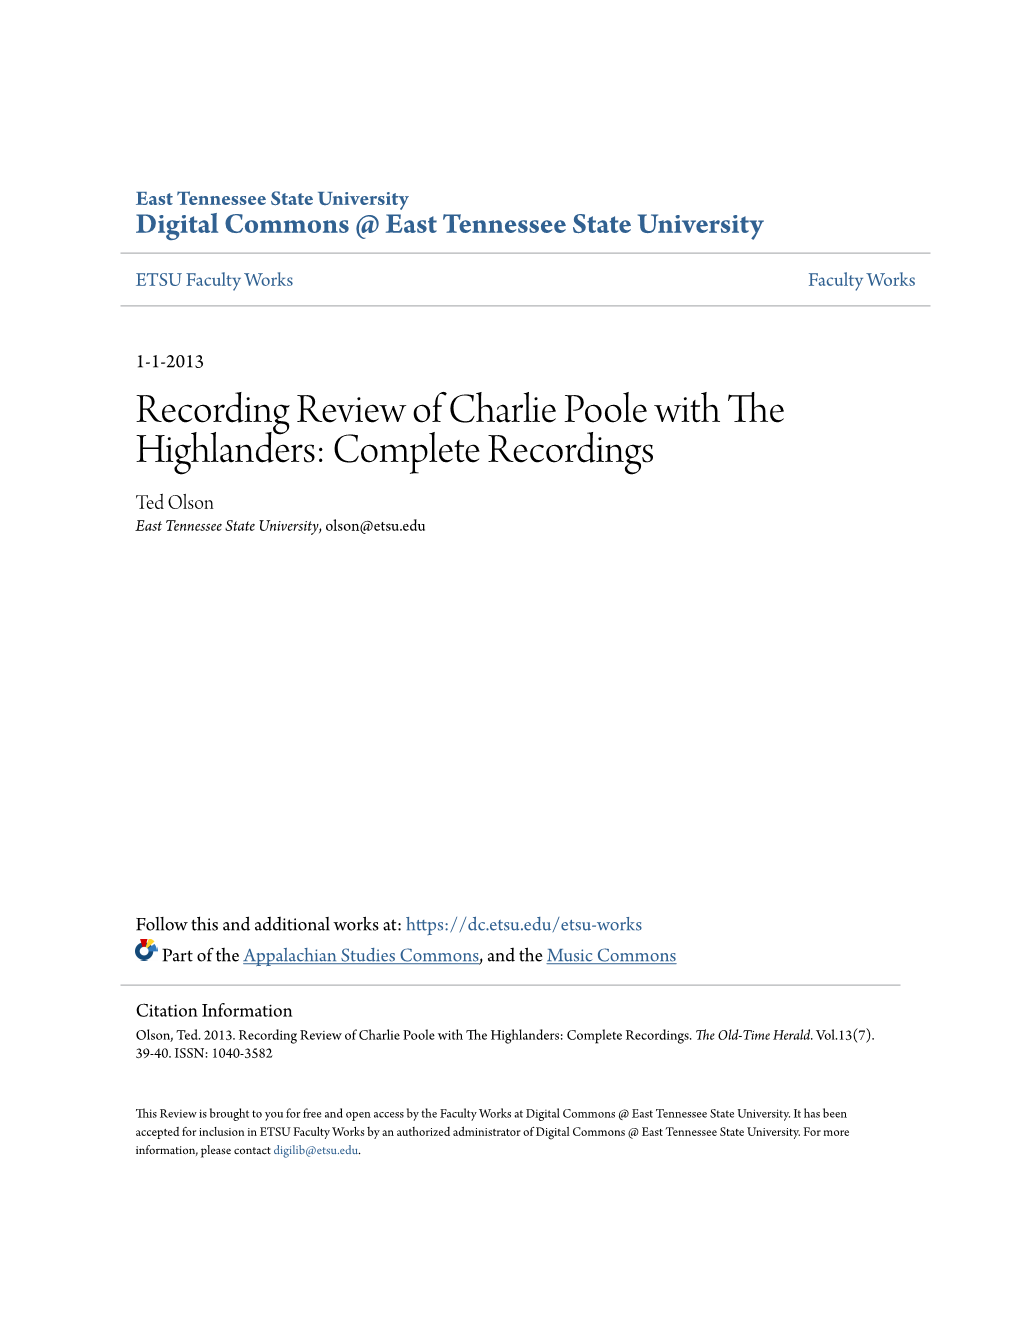 Recording Review of Charlie Poole with the Highlanders: Complete Recordings Ted Olson East Tennessee State University, Olson@Etsu.Edu